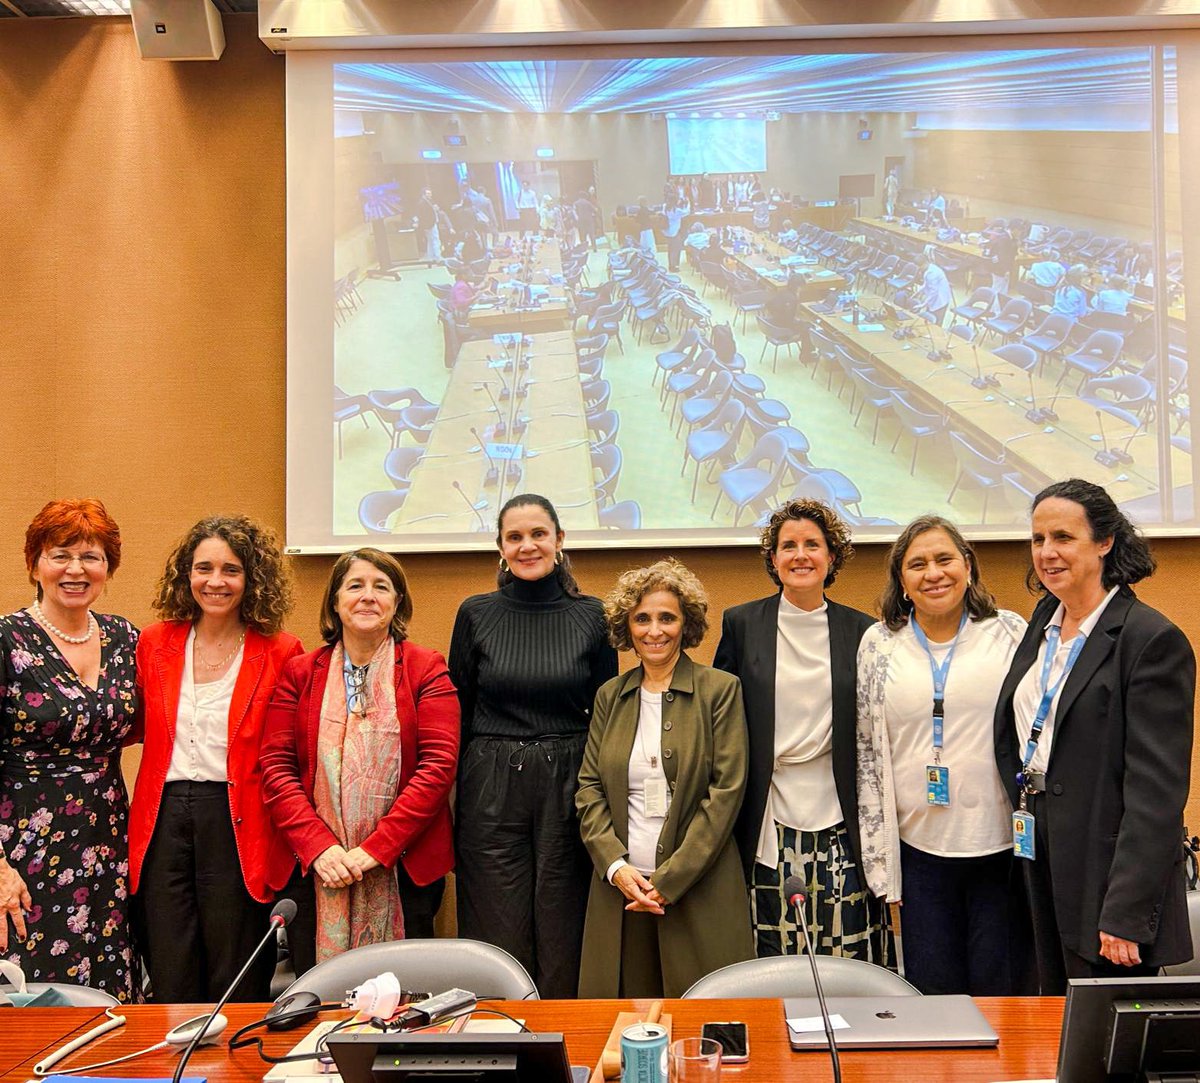 🙌🟣Today, GQUAL briefed the CEDAW Committee in Geneva, stressing equal representation for women in international decision-making spaces. Despite progress, women still face gaps in critical areas like peace and security, trade, and human rights.